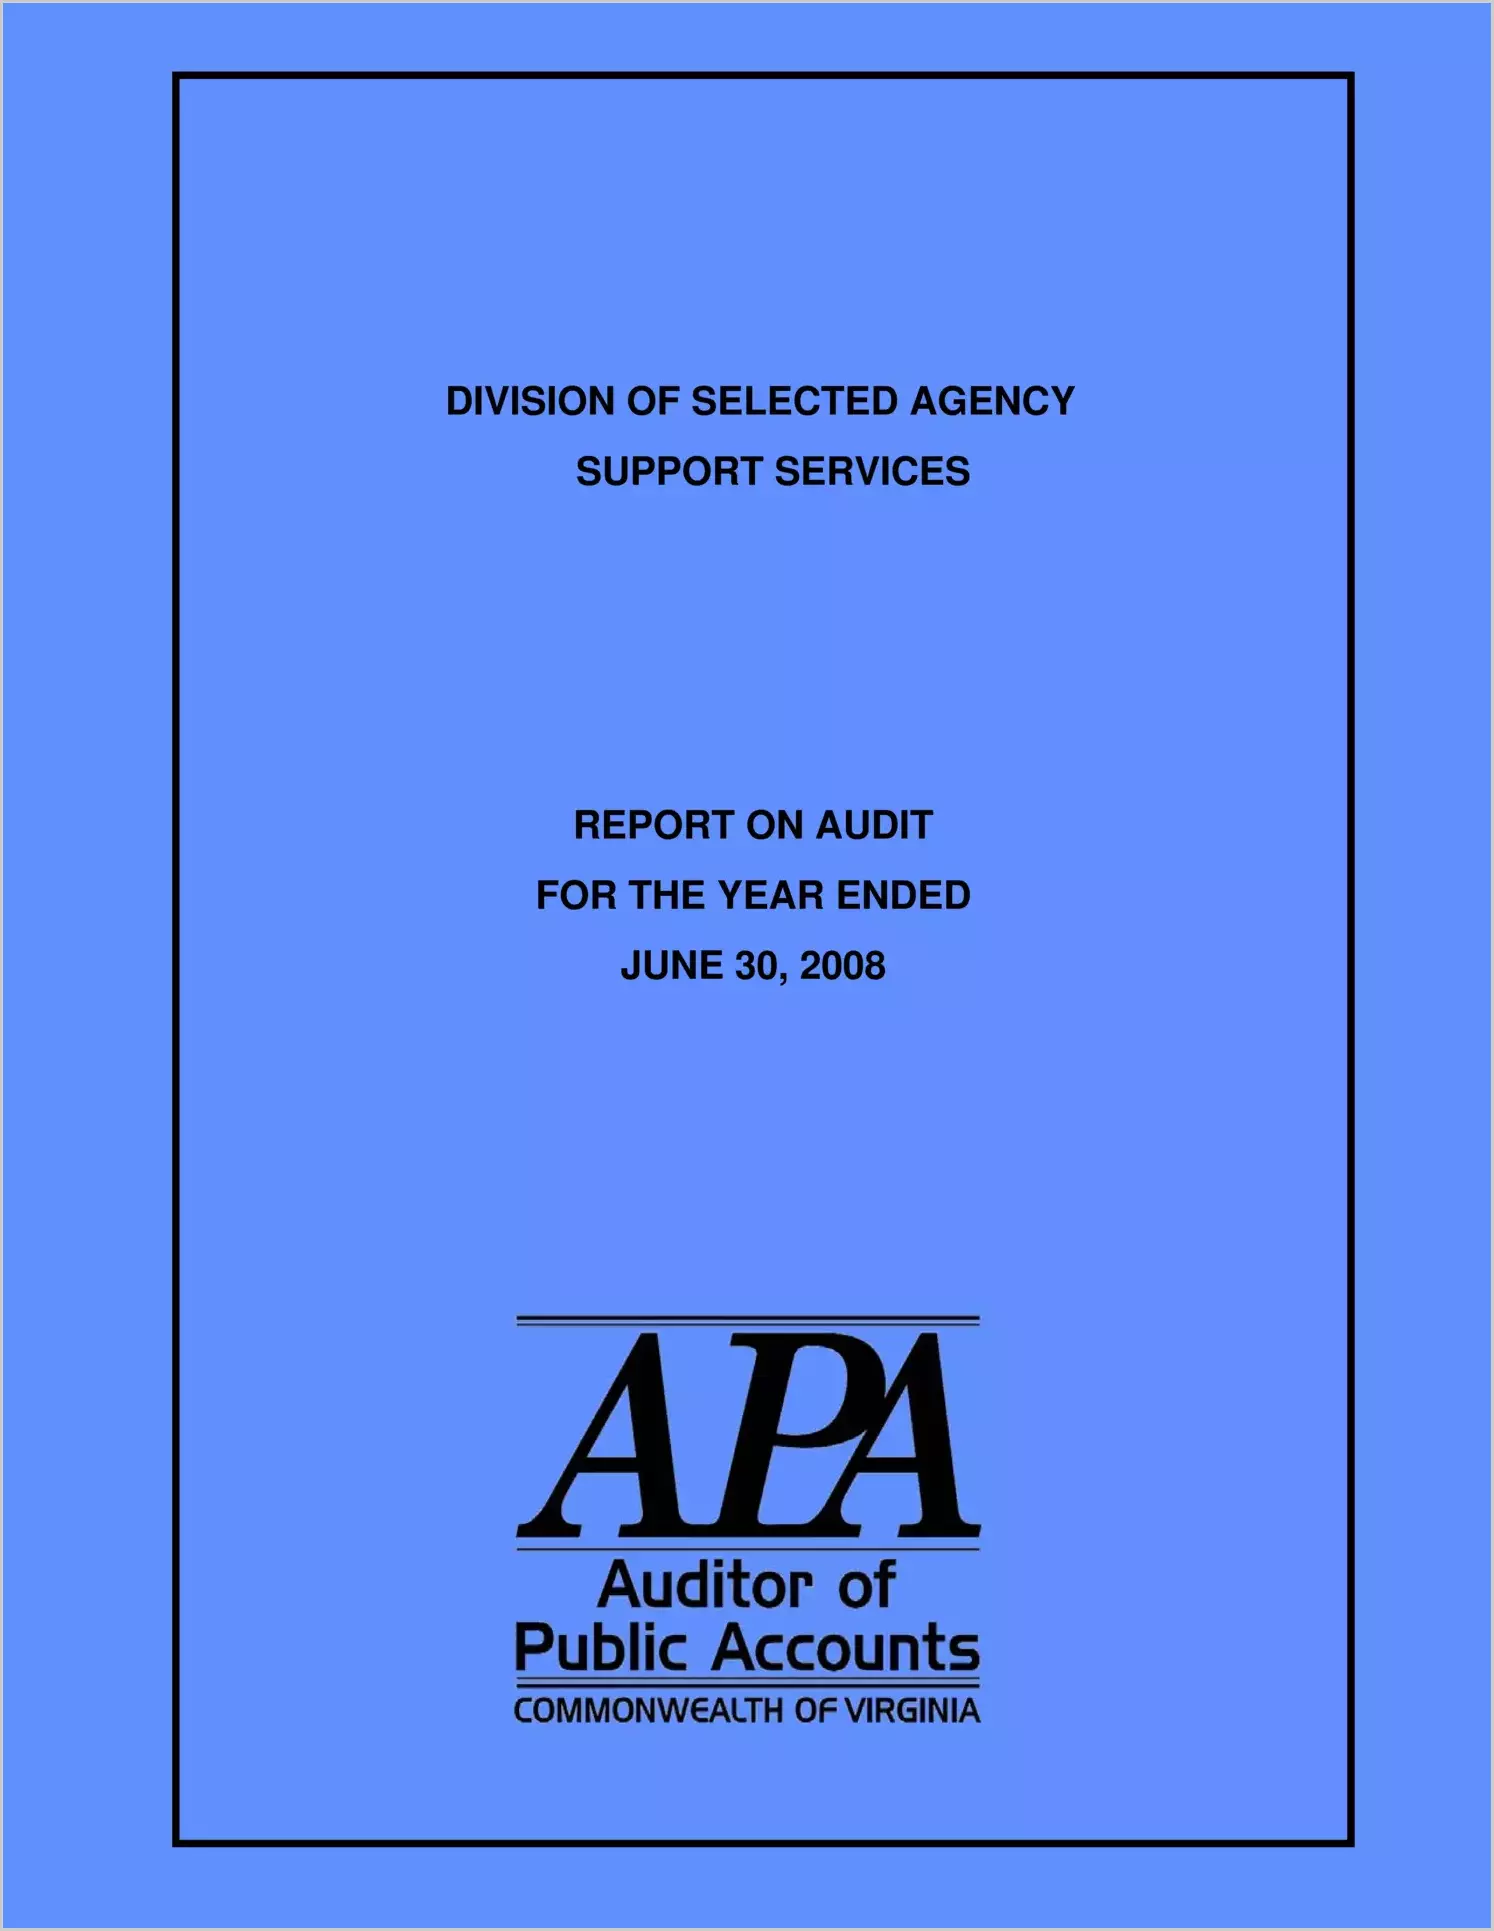 Division of Selected Agency Support Services for the year ended June 30, 2008